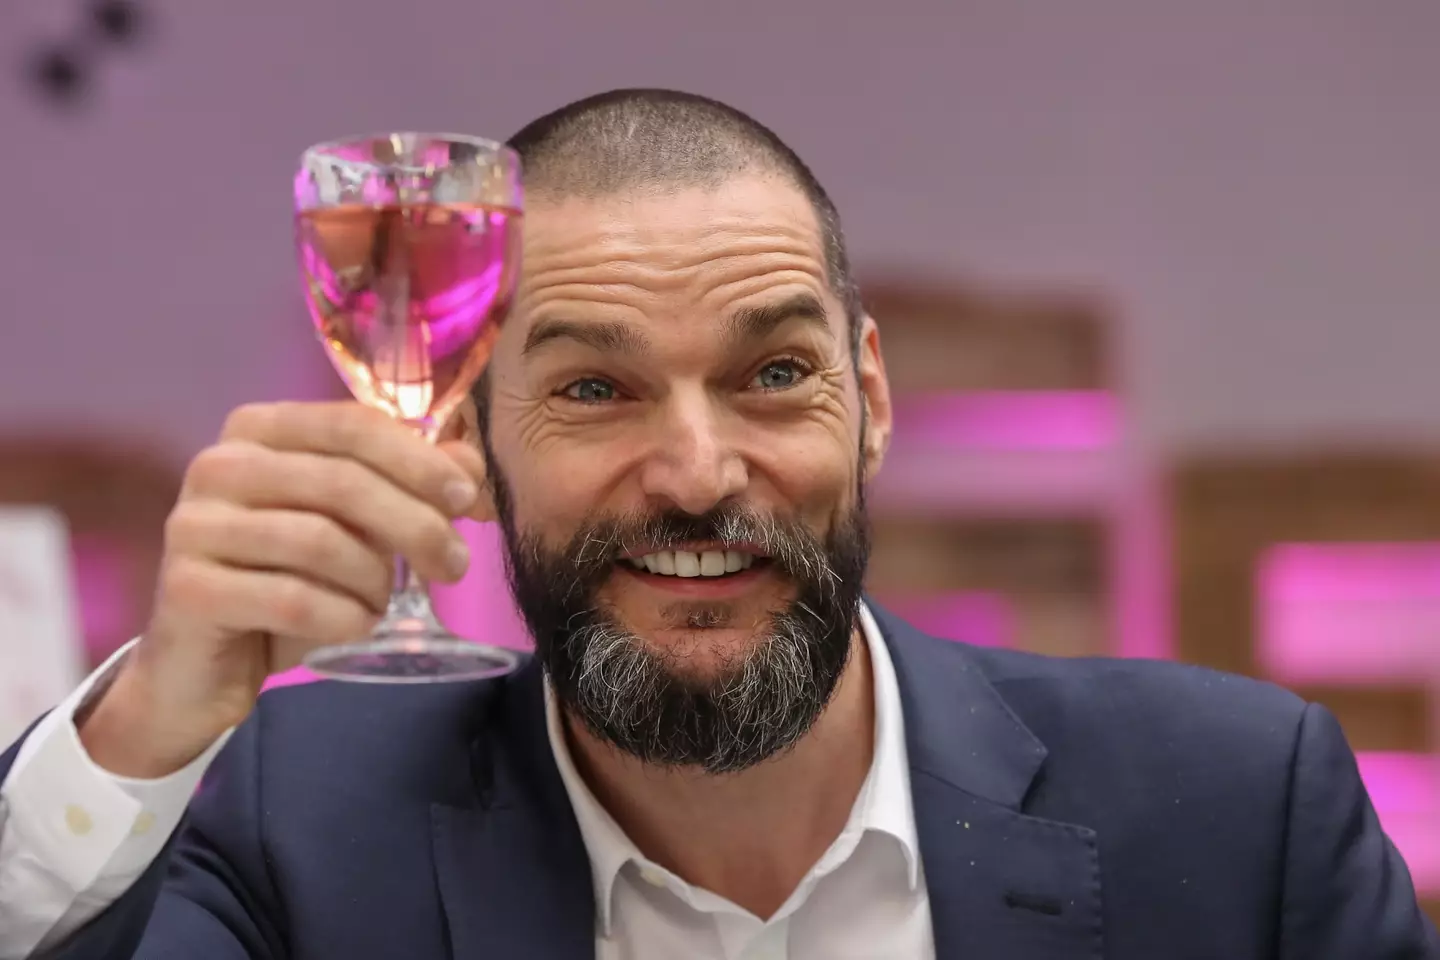 Jsky thought all-star Maître d' Fred Sirieix was his date.